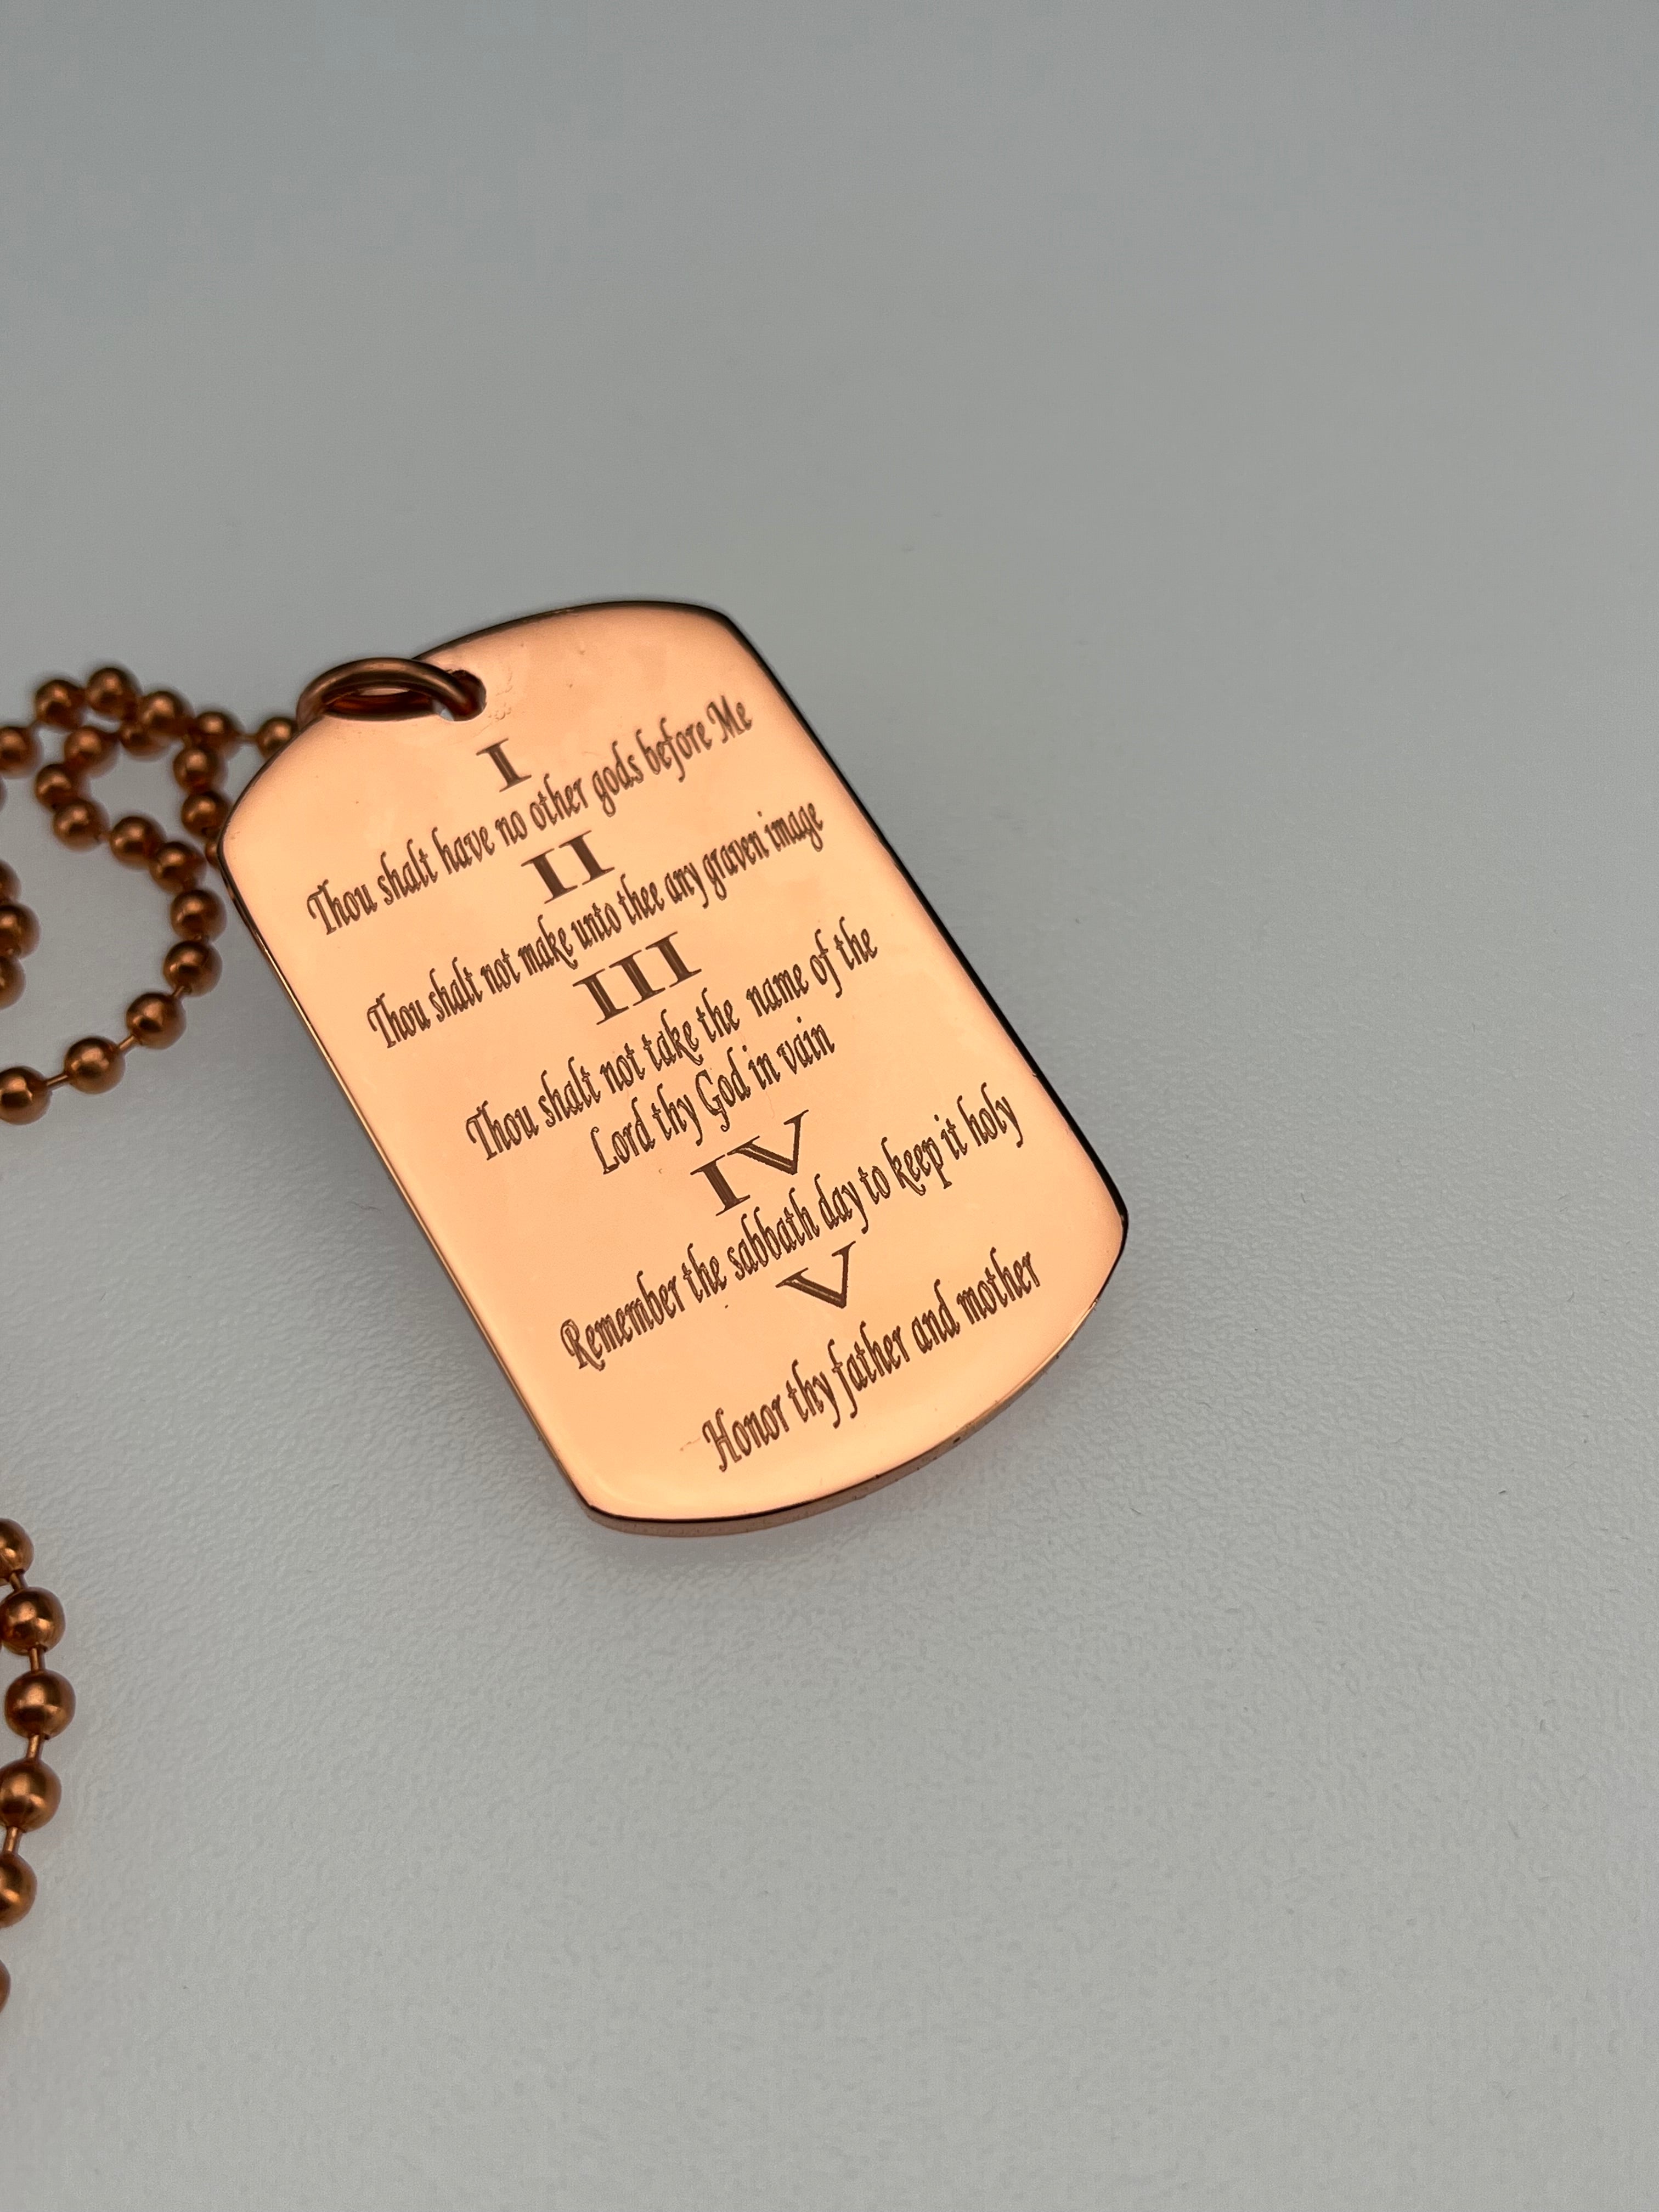 10 COMMANDMENTS SOLID THICK COPPER BALL CHAIN PRAYER NECKLACE